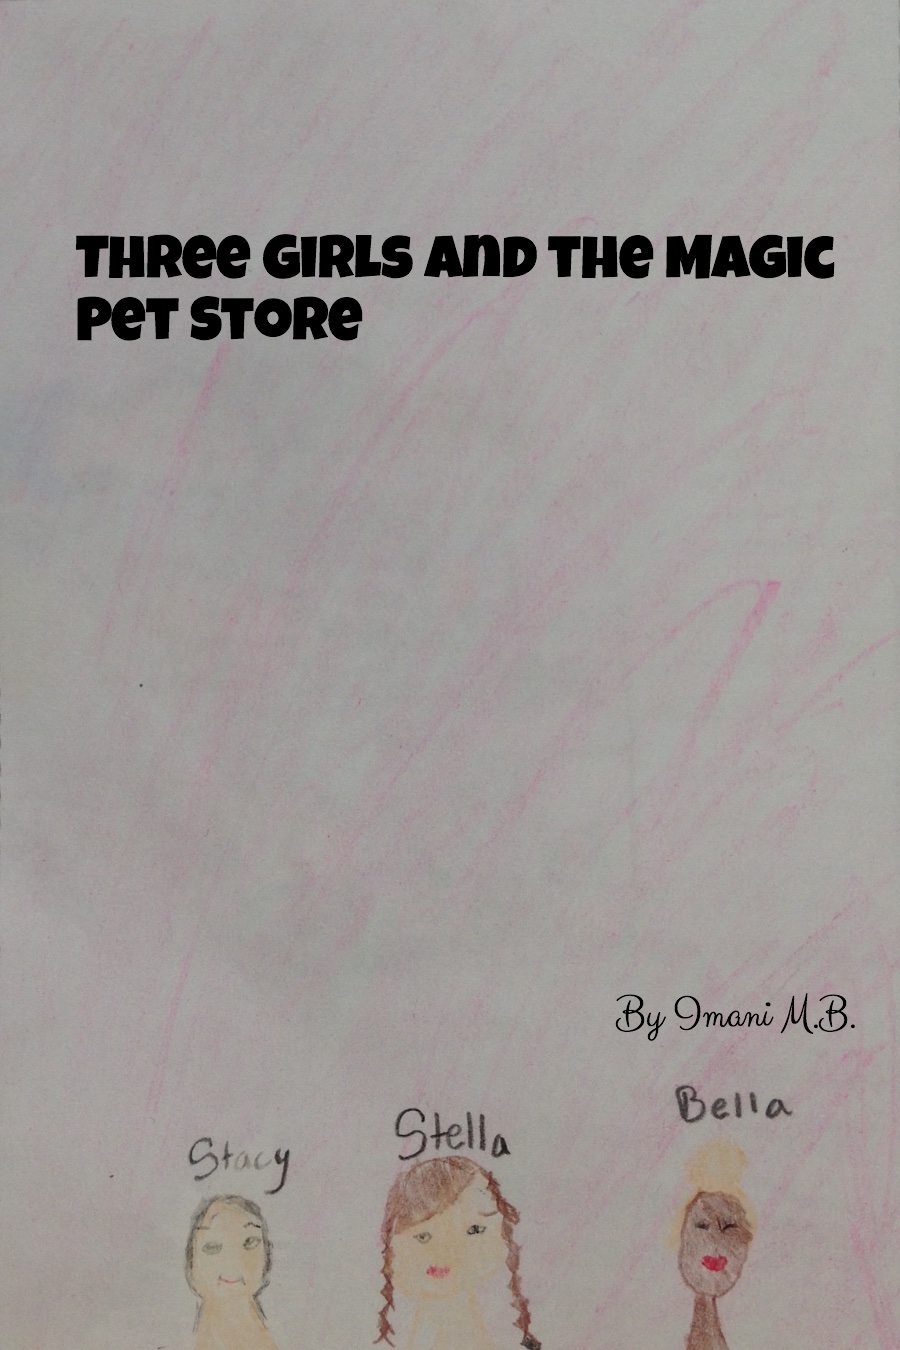 Three Girls and the Magic Pet Store by Imani MB